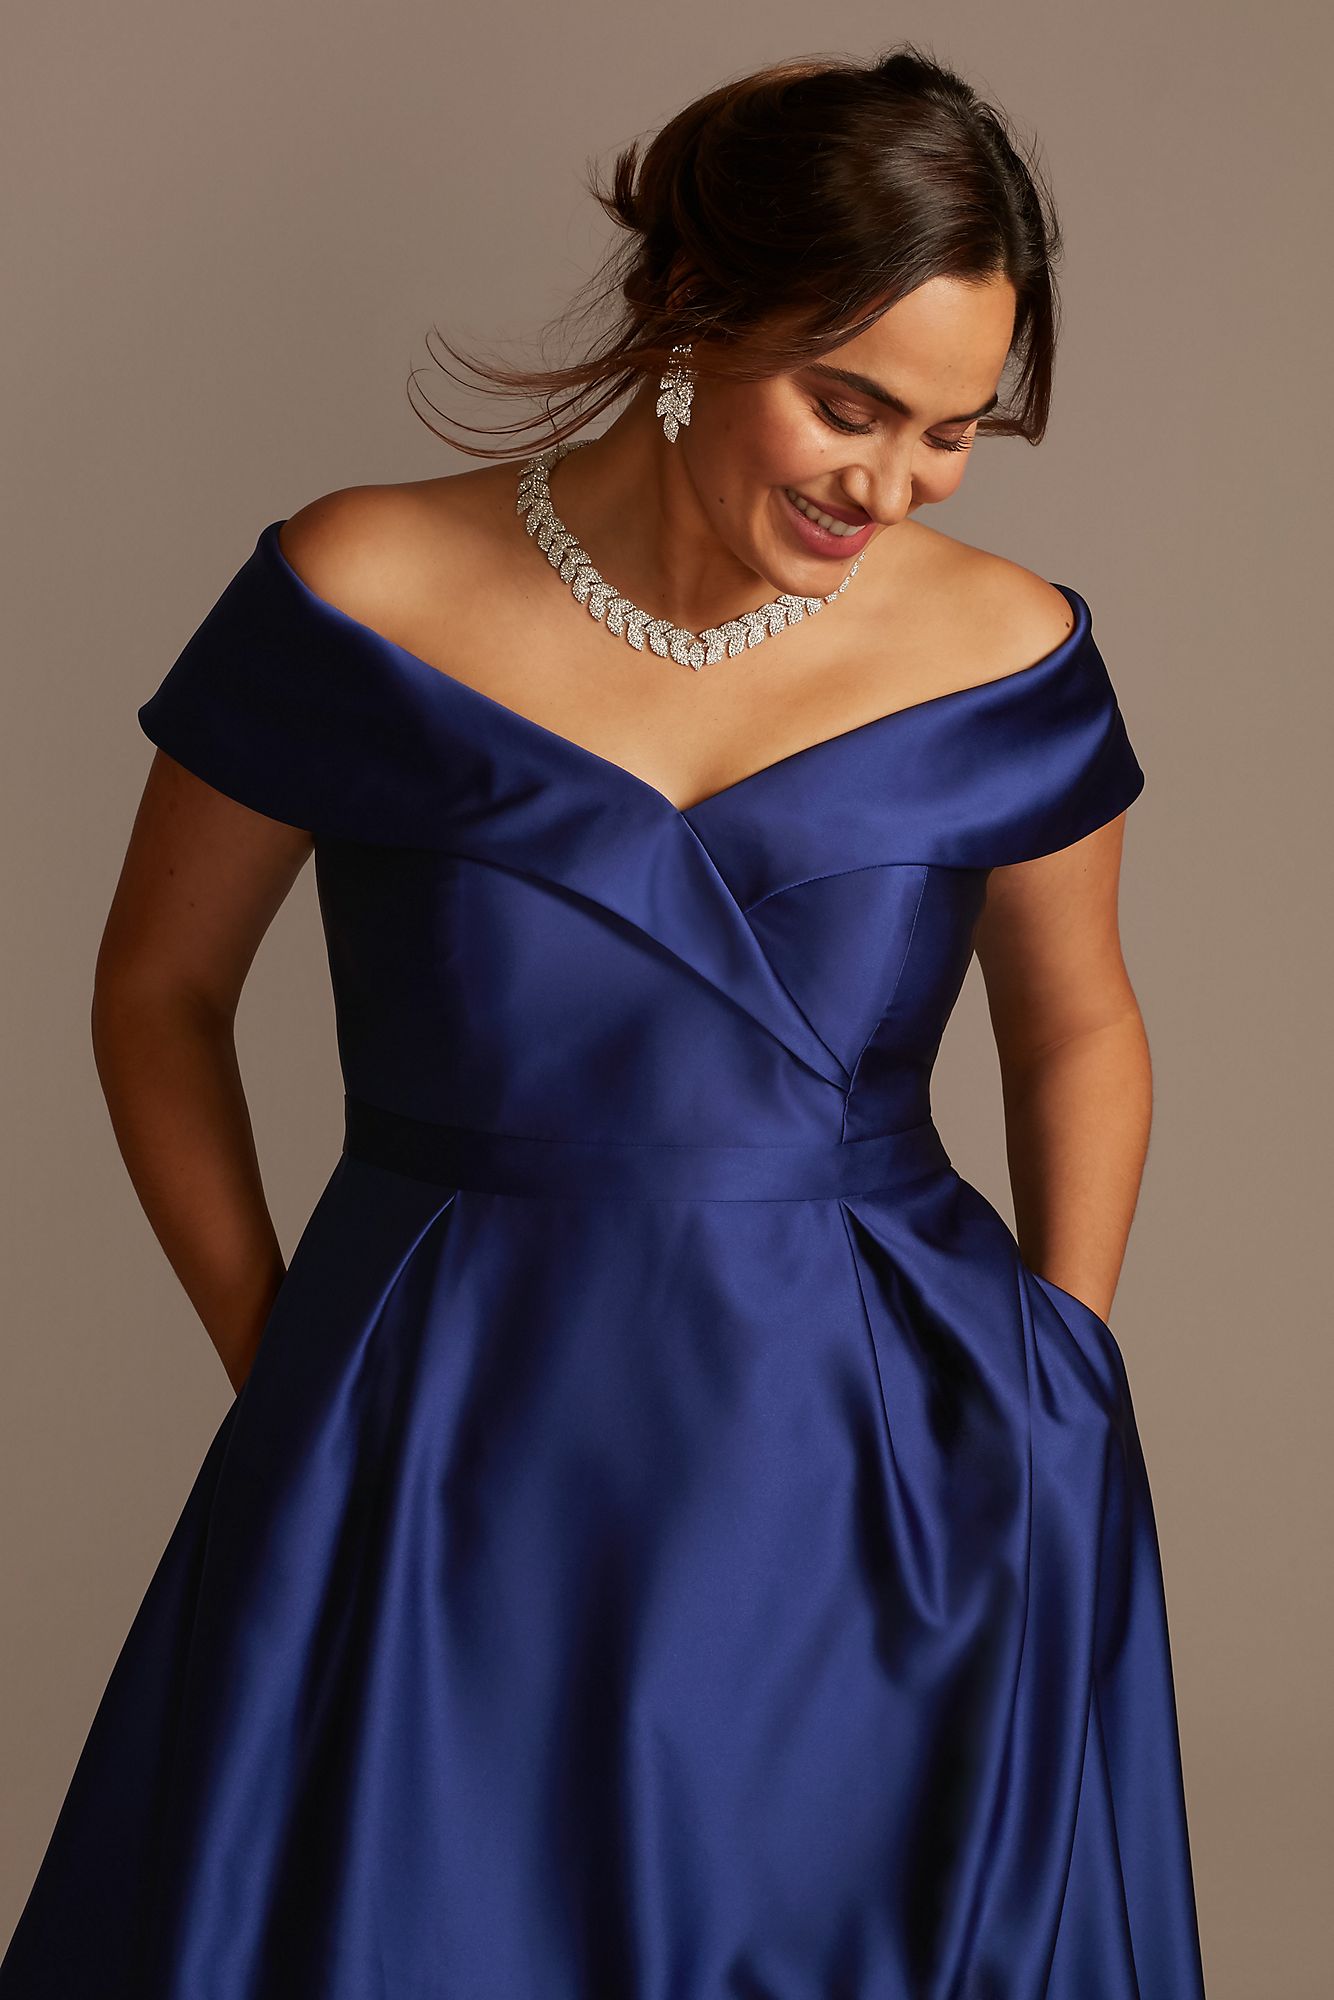 Satin Plus Size Ball Gown with Portrait Collar  3476XW